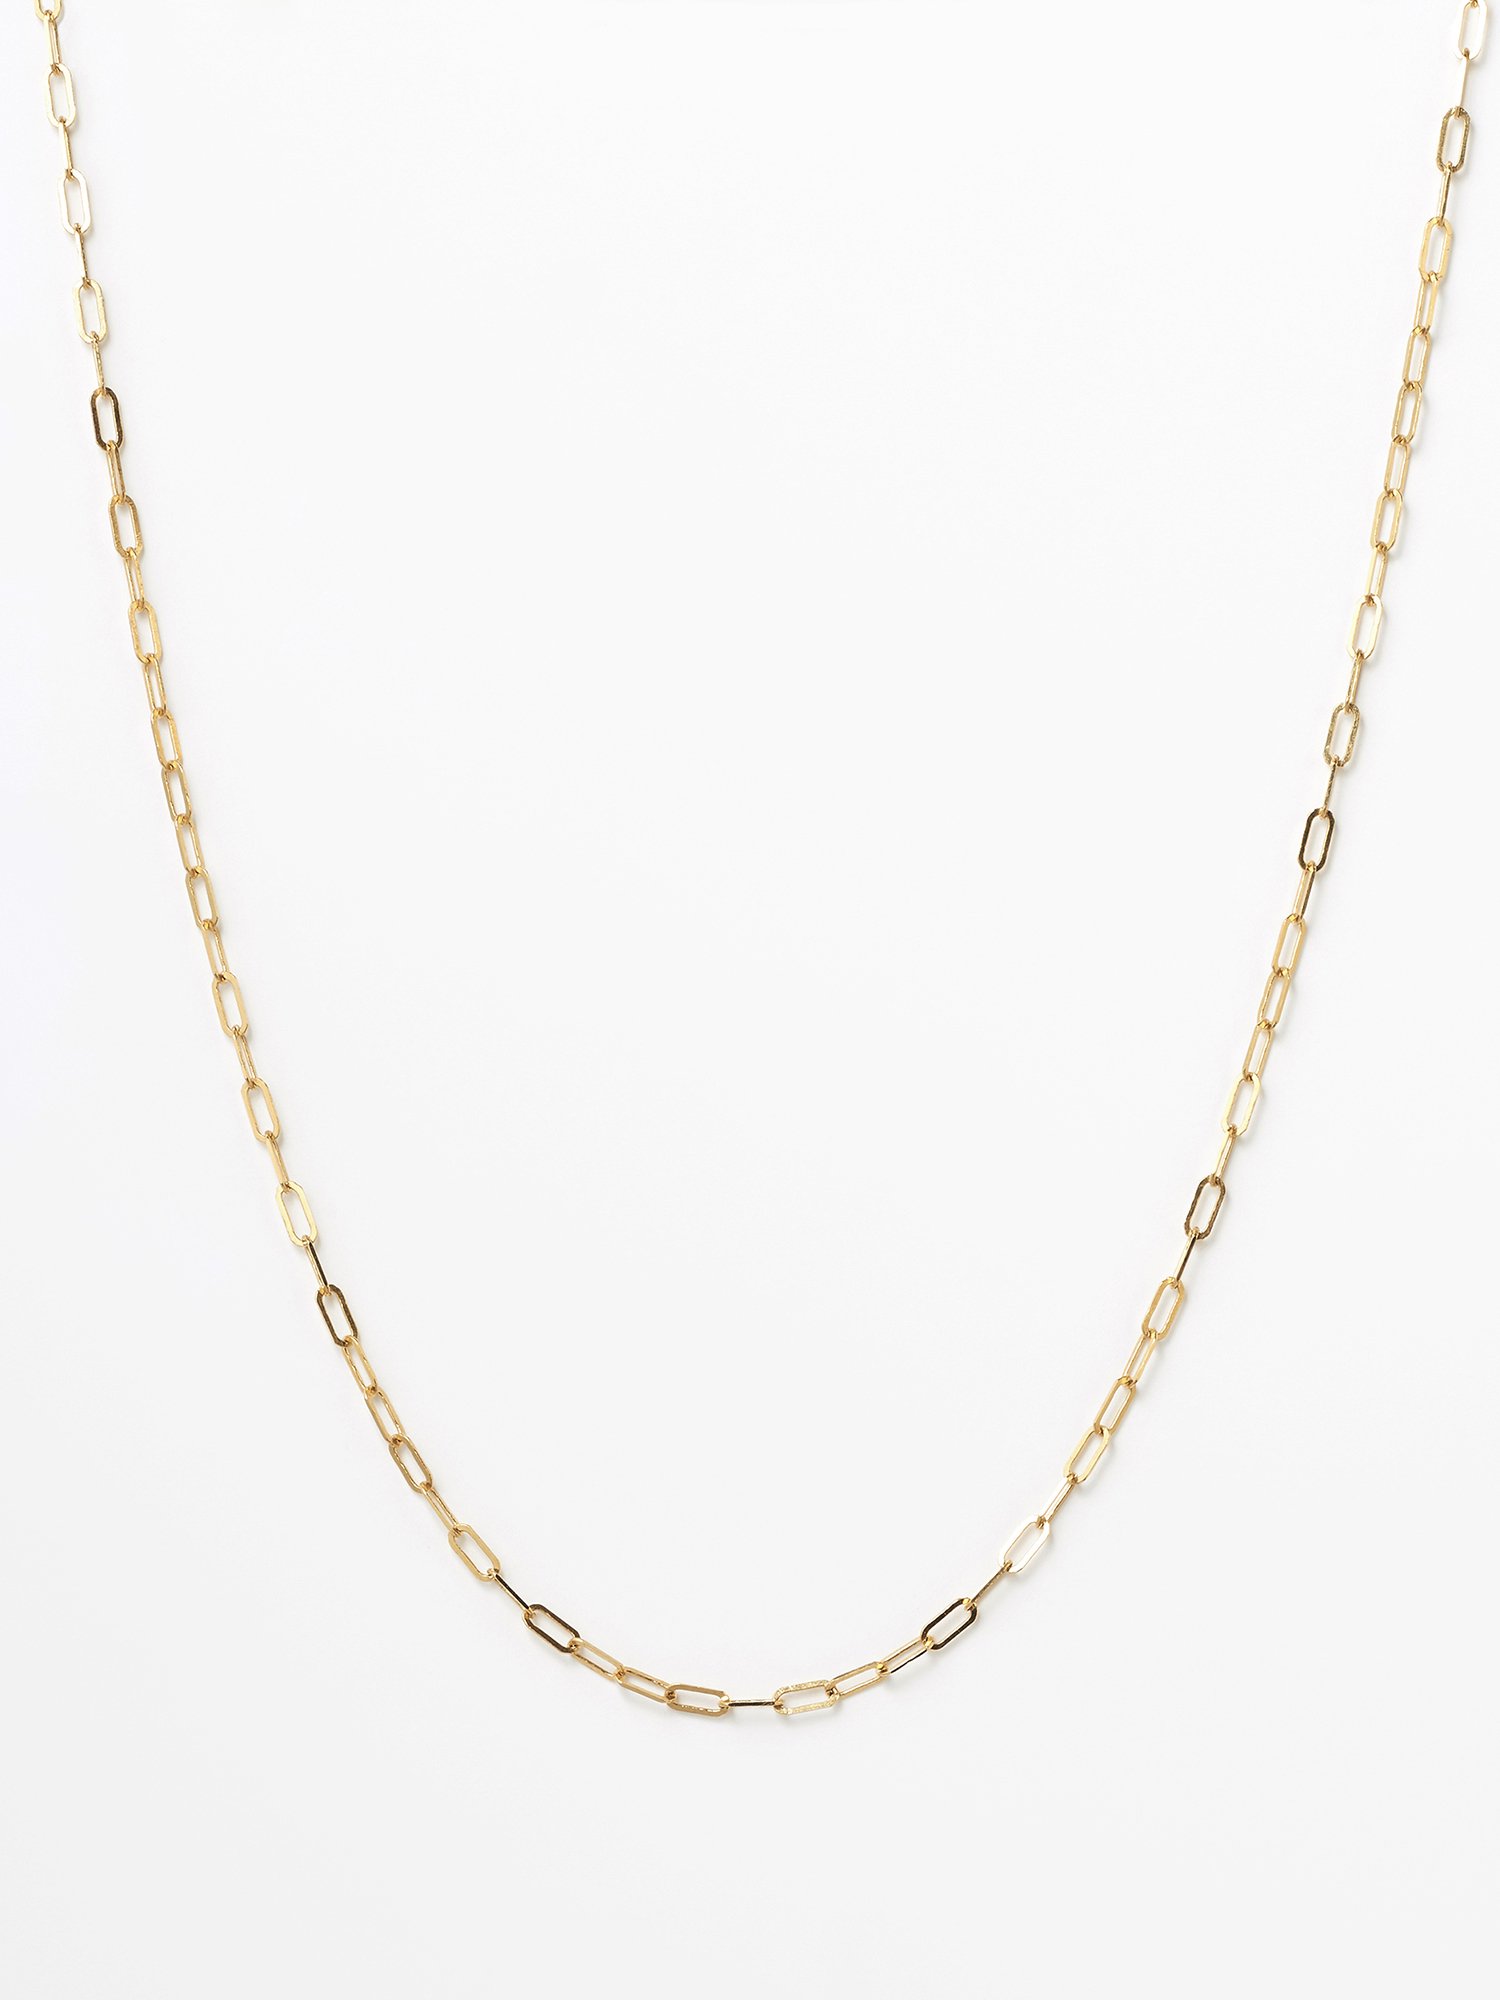 HELIOS / Helios chain necklace / 440mm